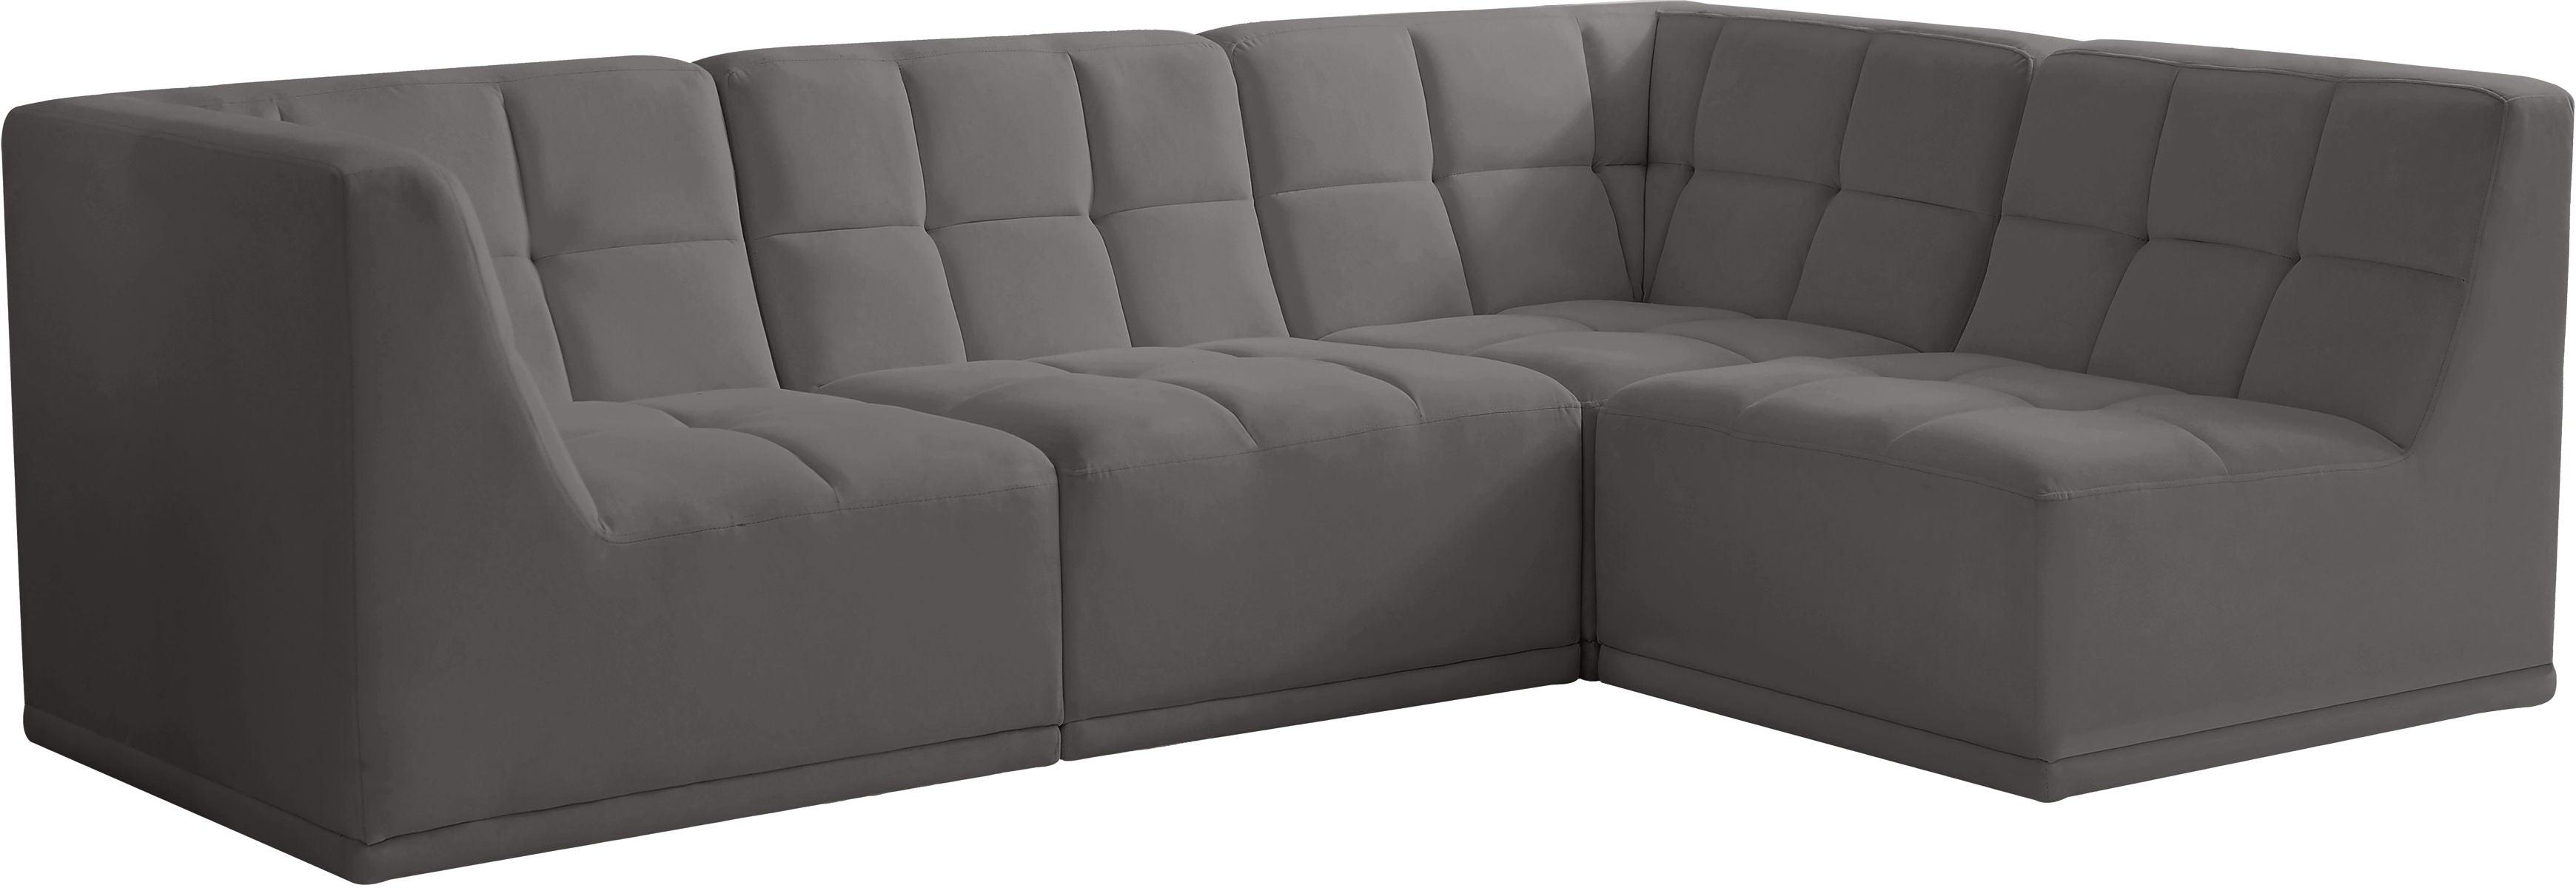 Meridian Furniture - Relax - Modular Sectional 4 Piece - Gray - 5th Avenue Furniture